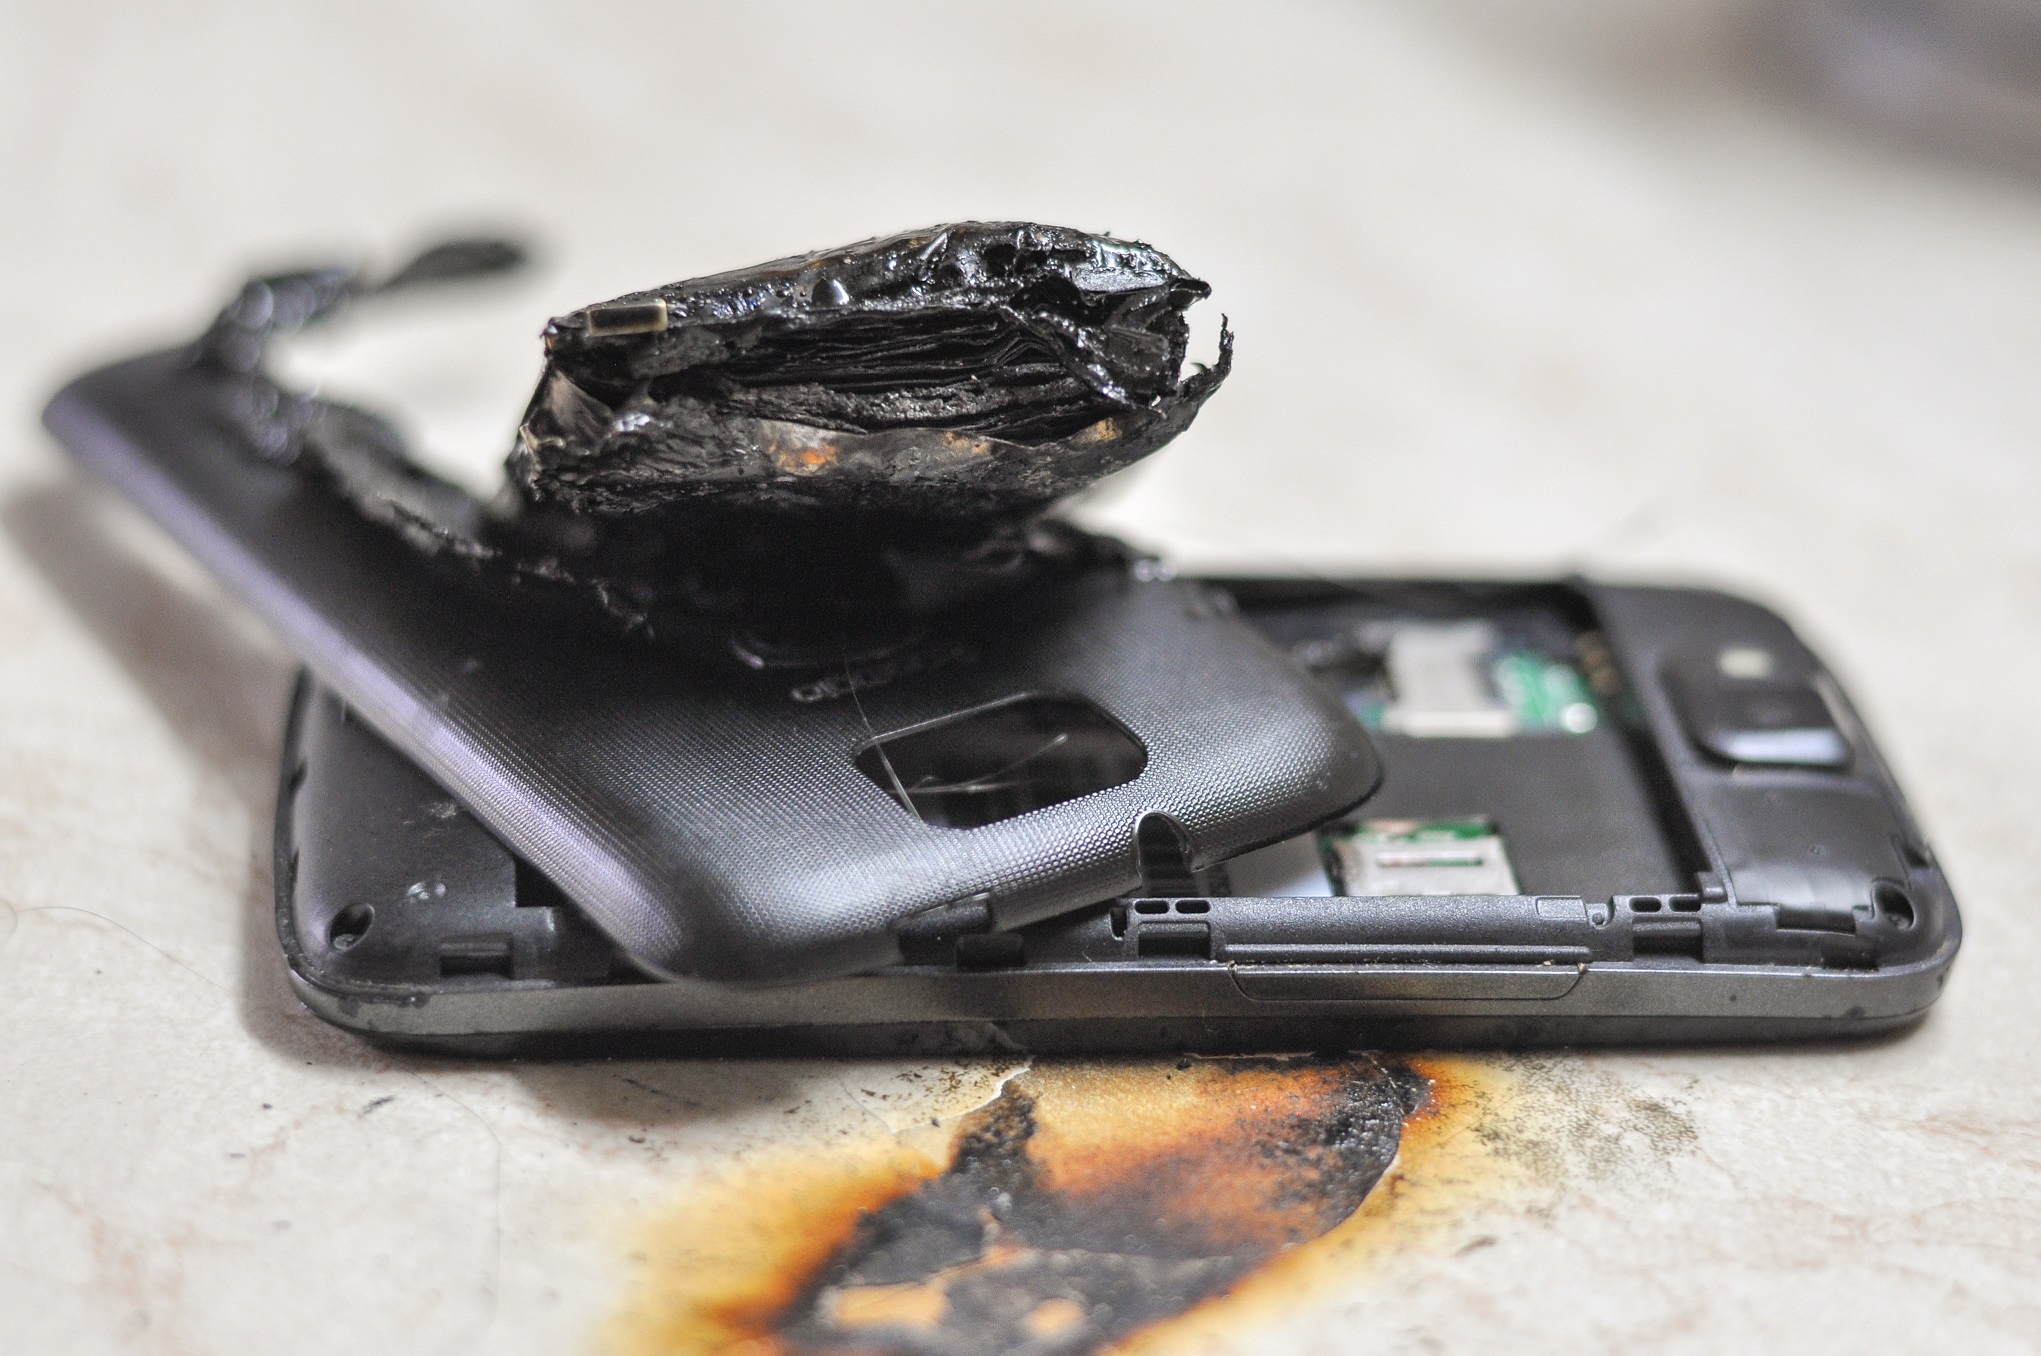 Cell phone battery exploded